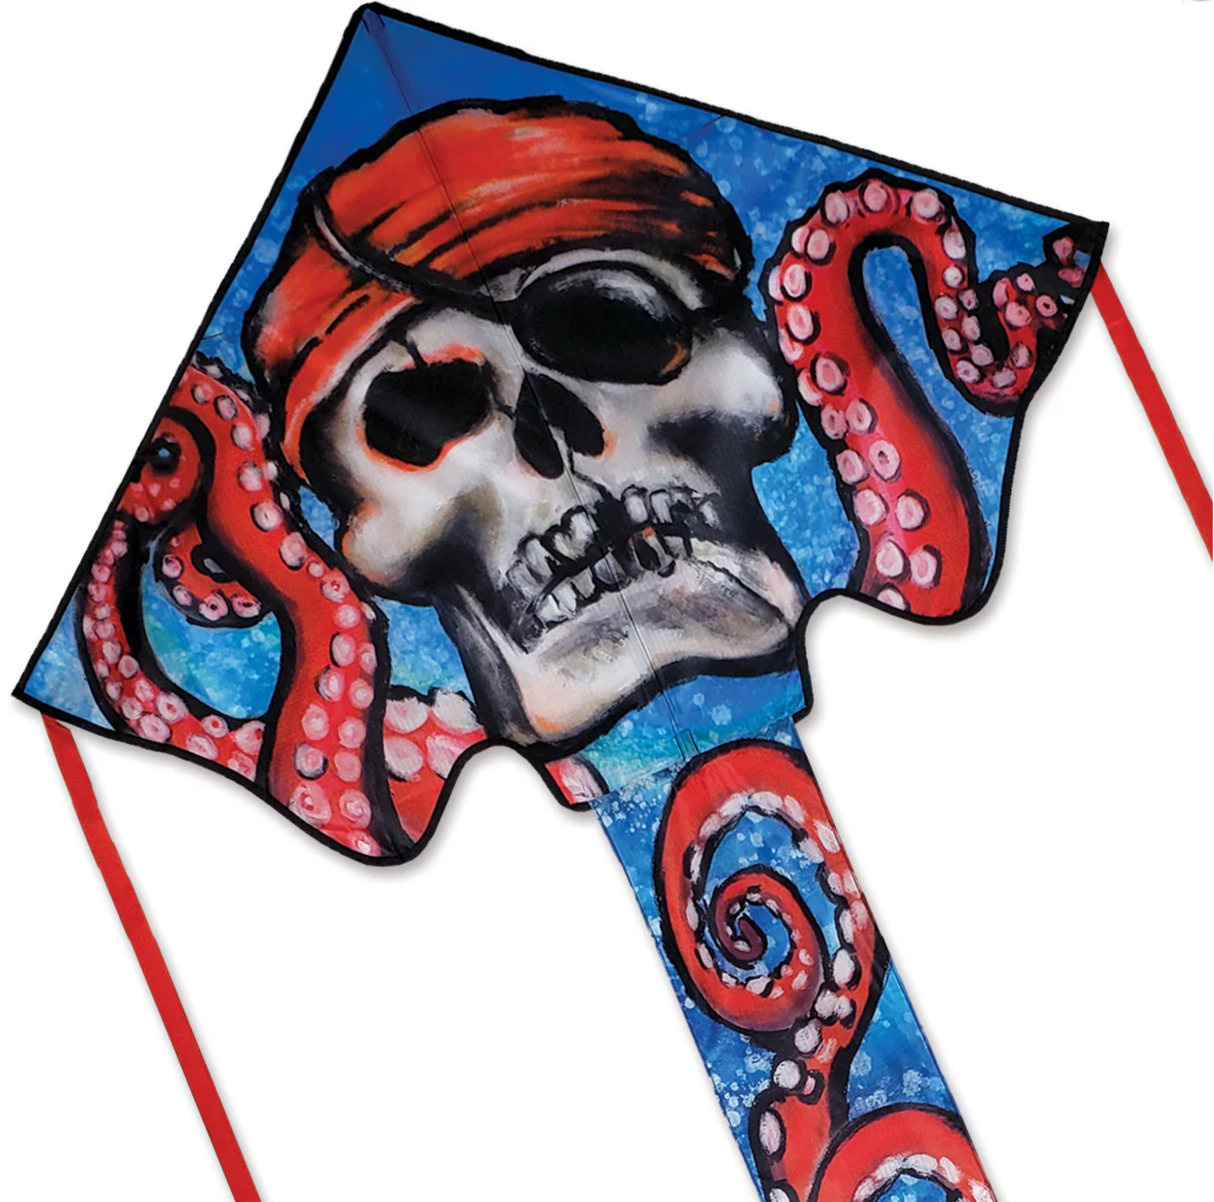 46" Easy Flyer Kite | Pirate Octopus